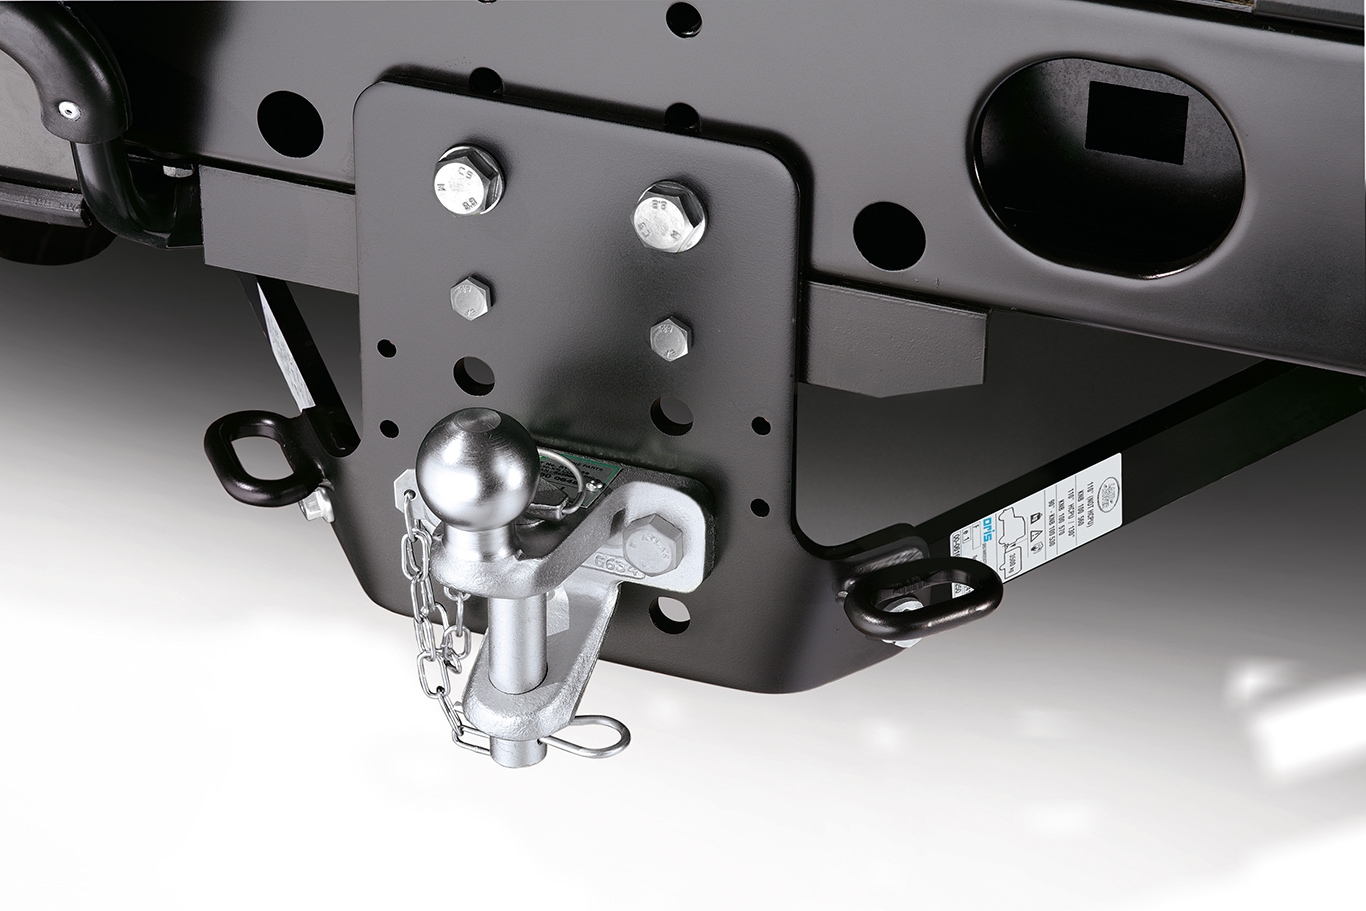 Towing System - Combination Tow Ball/Jaw Unit